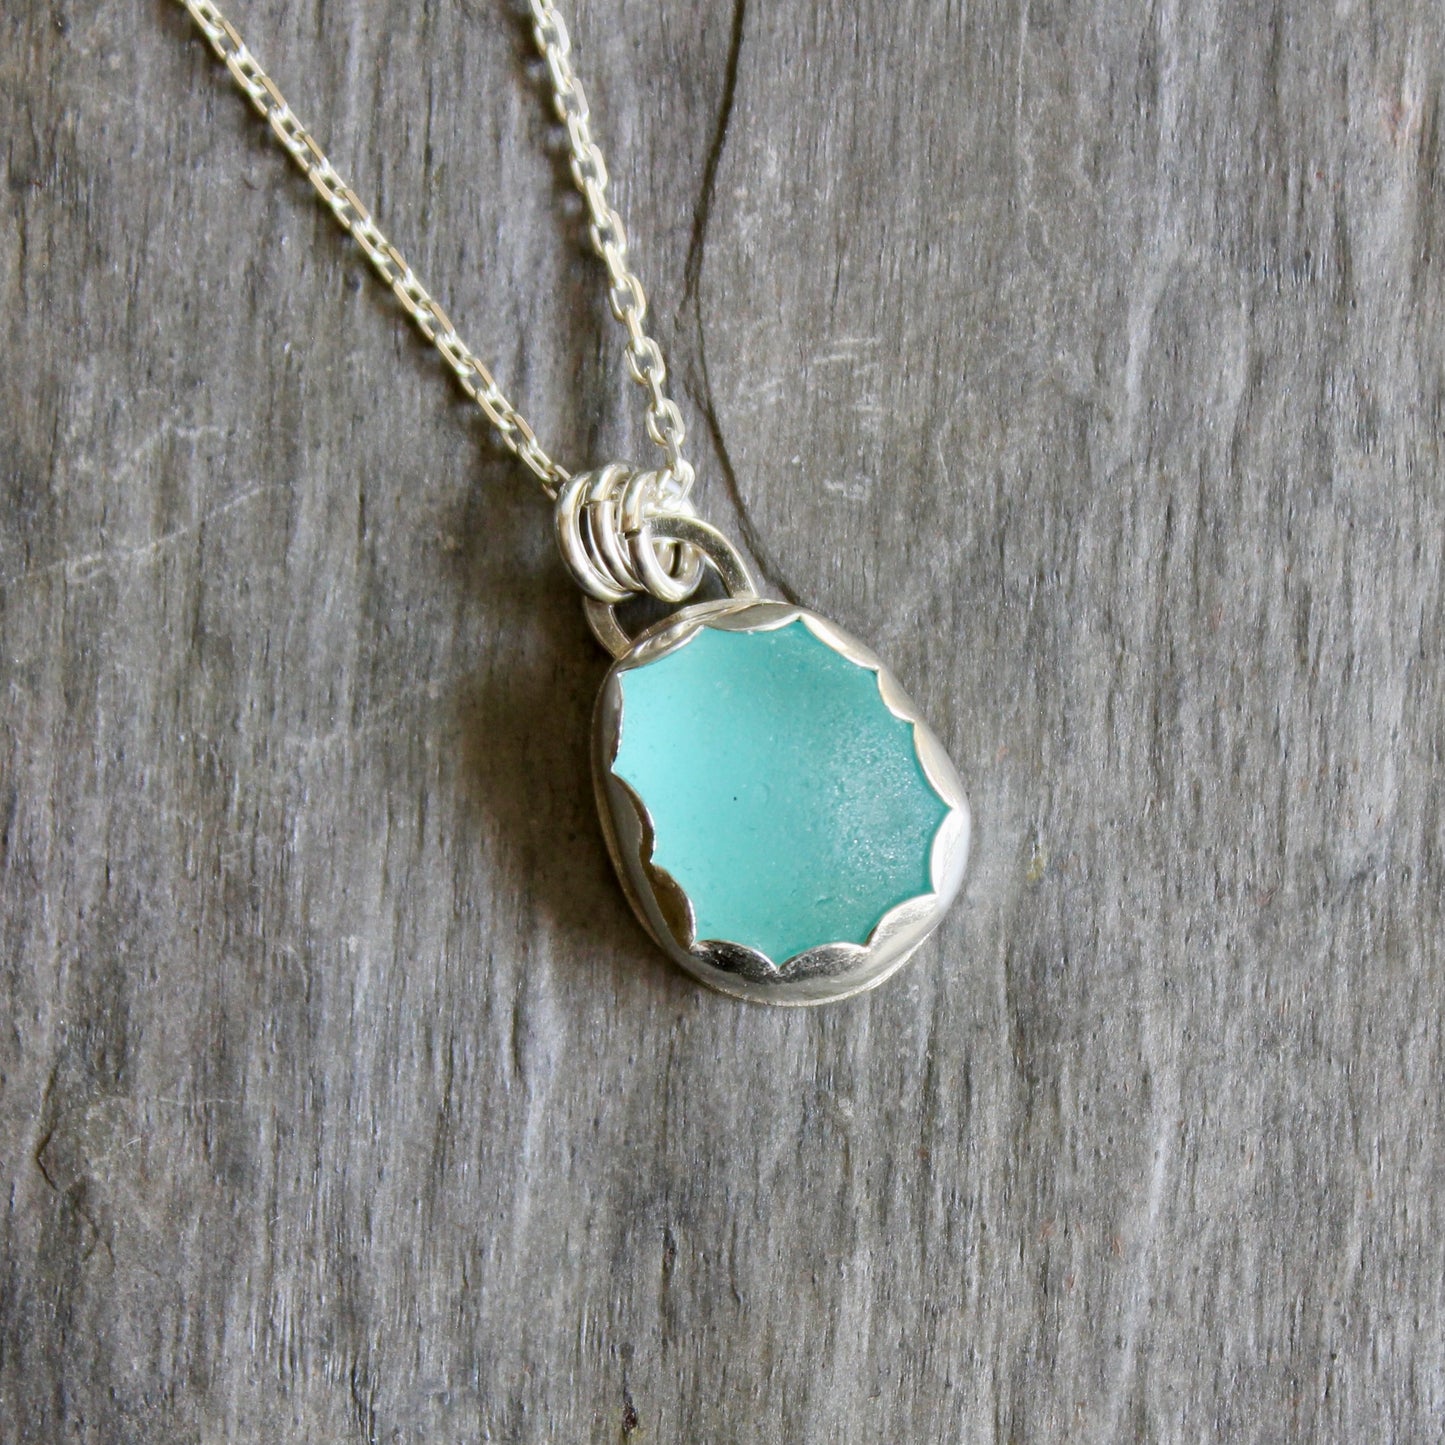 This is a small piece of aqua blue sea glass set in a fine & sterling silver scalloped bezel setting on an 18 inch chain. 